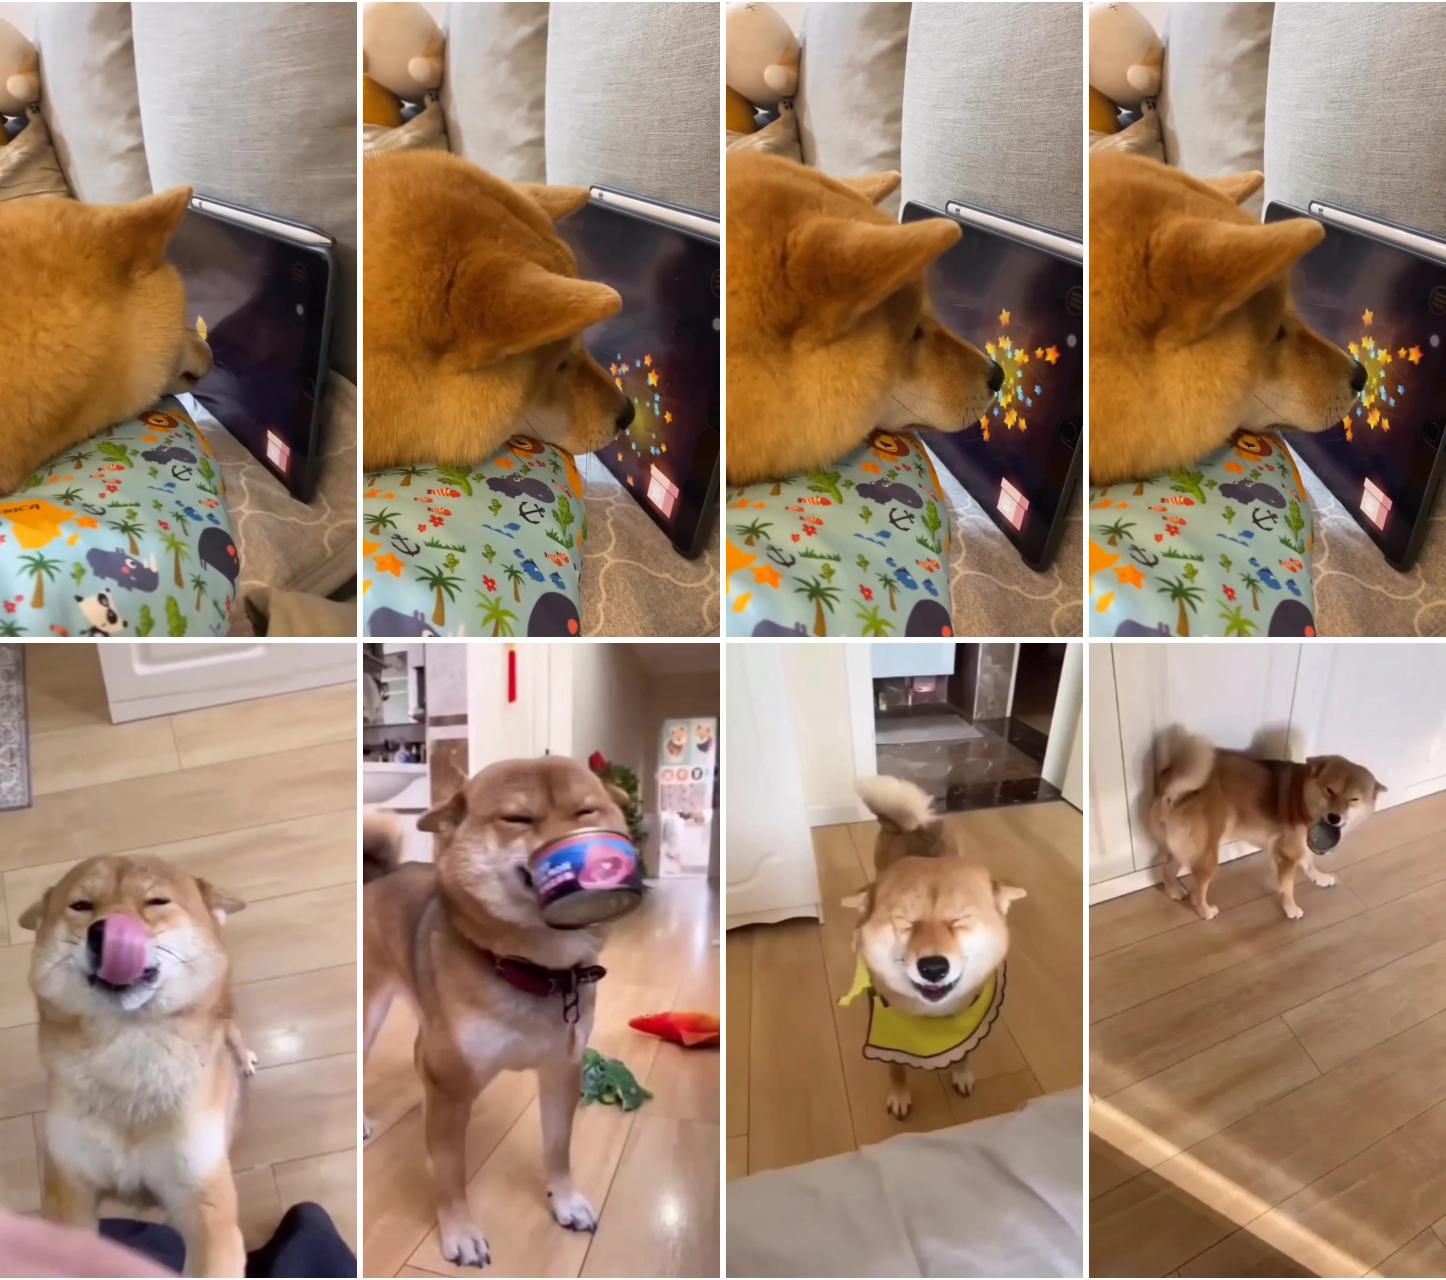  smart shiba inu puppy plays video game on tablet - adorable and beautiful ; show your dog is happy, without actually saying your dog is happy 